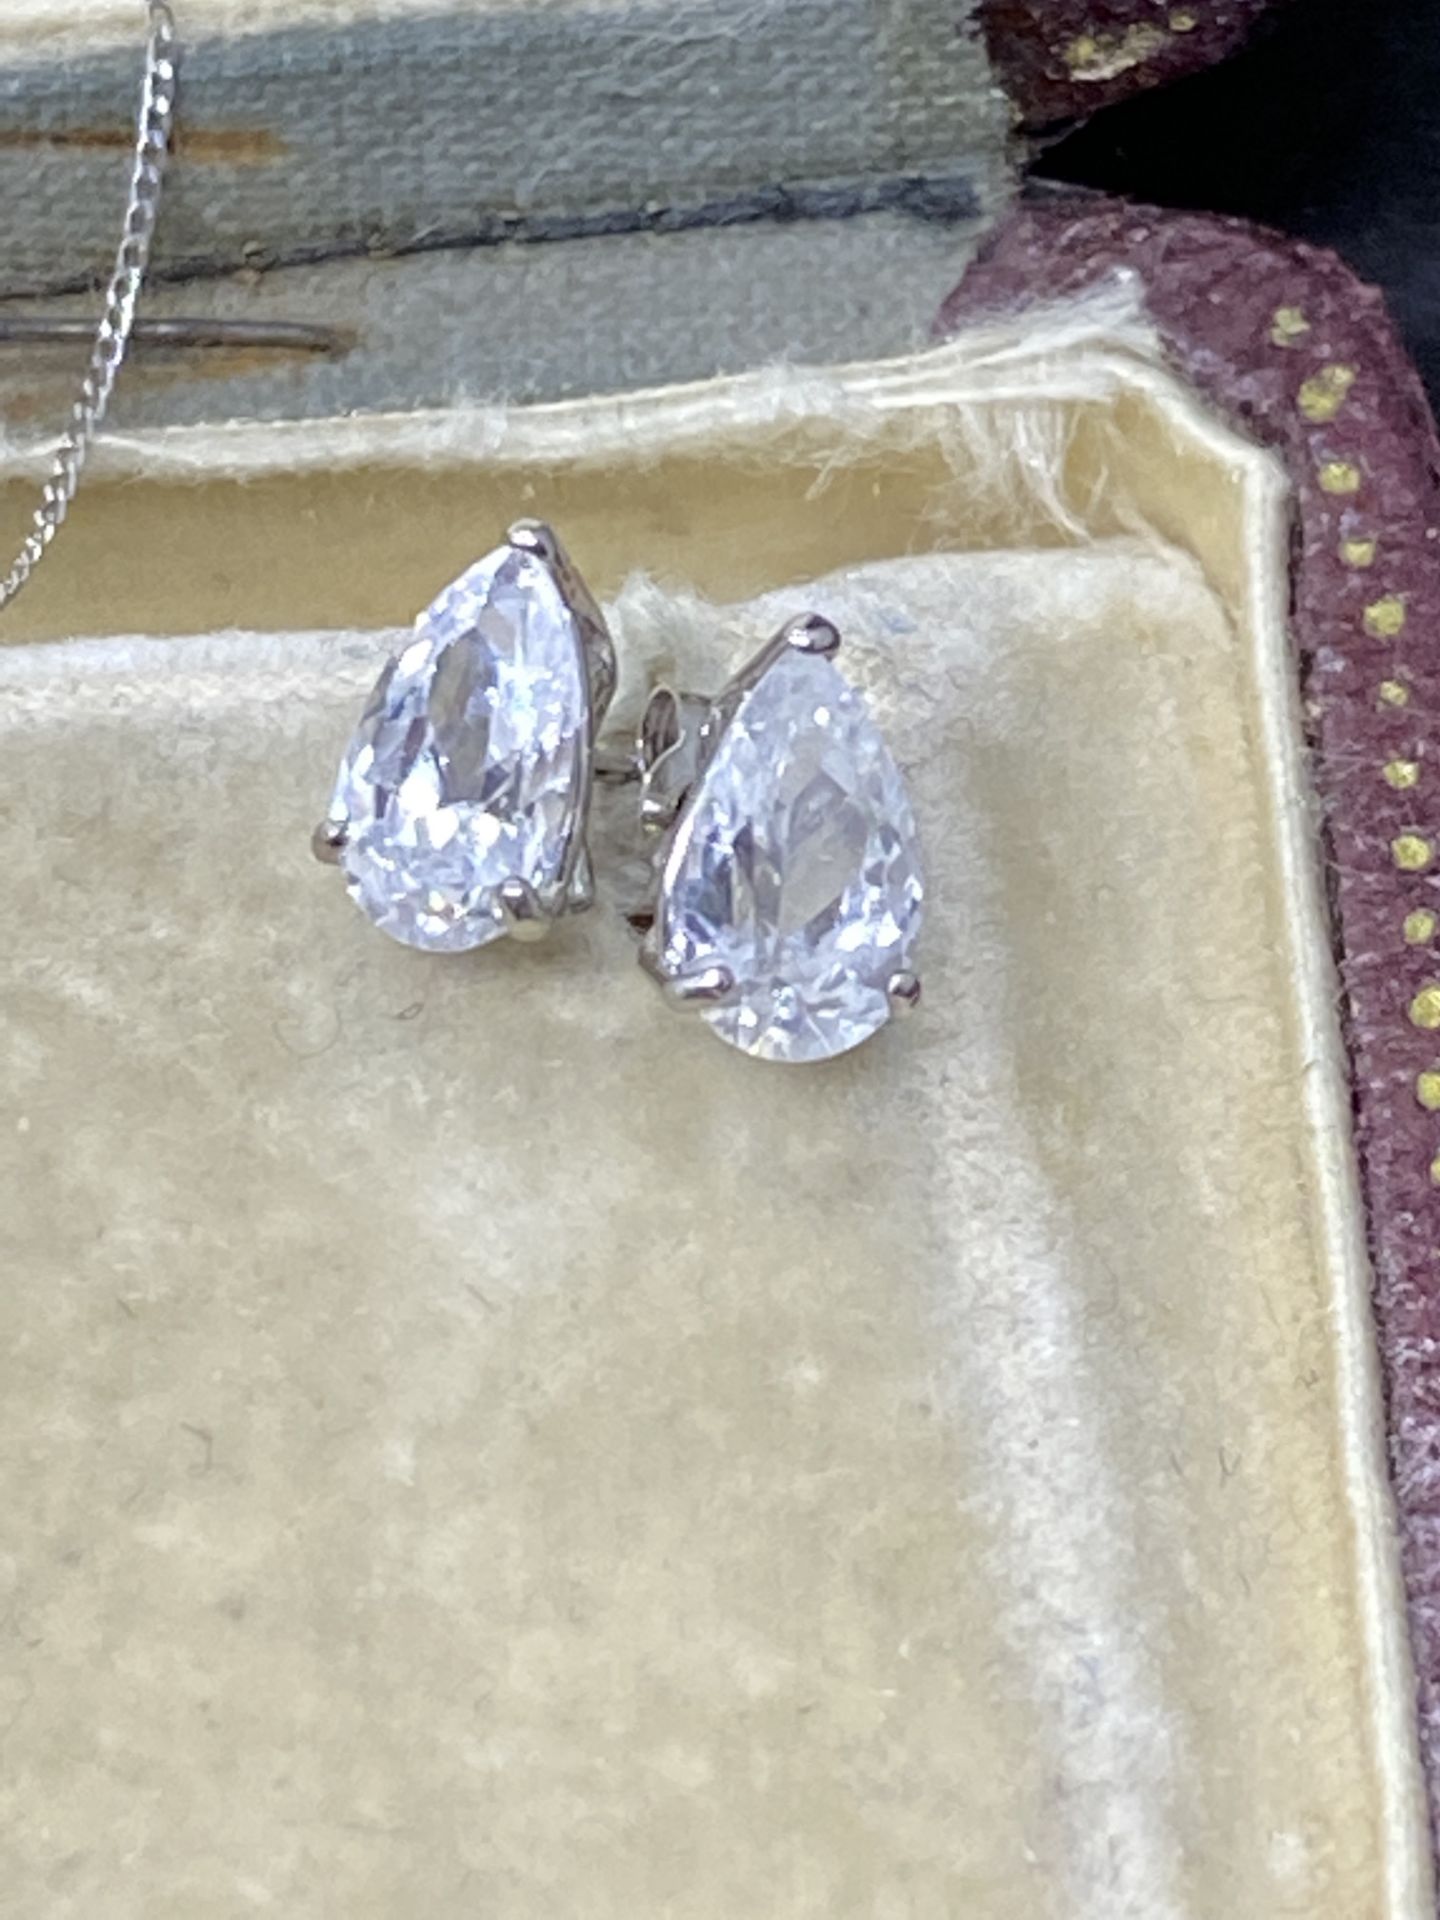 9ct WHITE GOLD PEAR SHAPED PENDANT & EARRING SET - Image 3 of 5